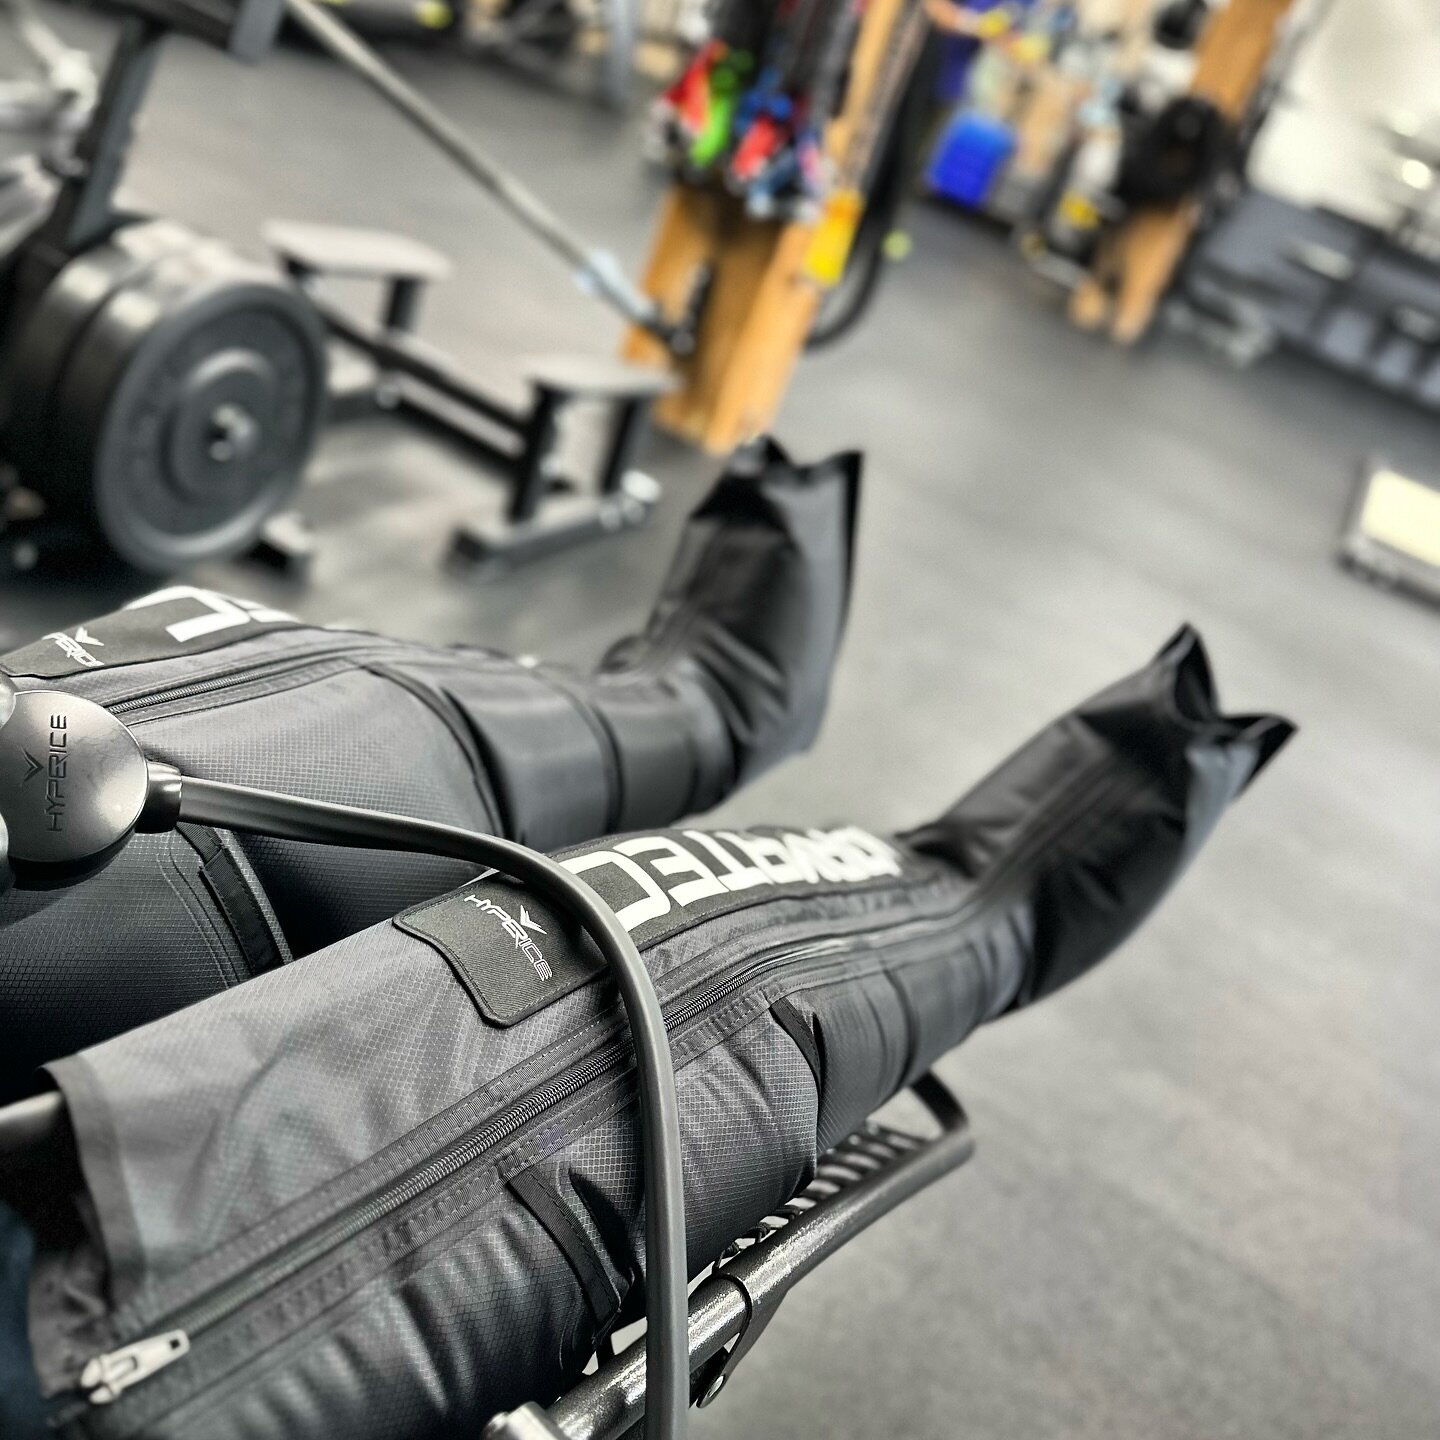 Recovery is essential in any workout program. Constantly pushing without giving your body a chance to rest and recover can set you back in your training. Recovery boots are one of the many ways we help keep our clients fit and moving forward! 
.
.
#f